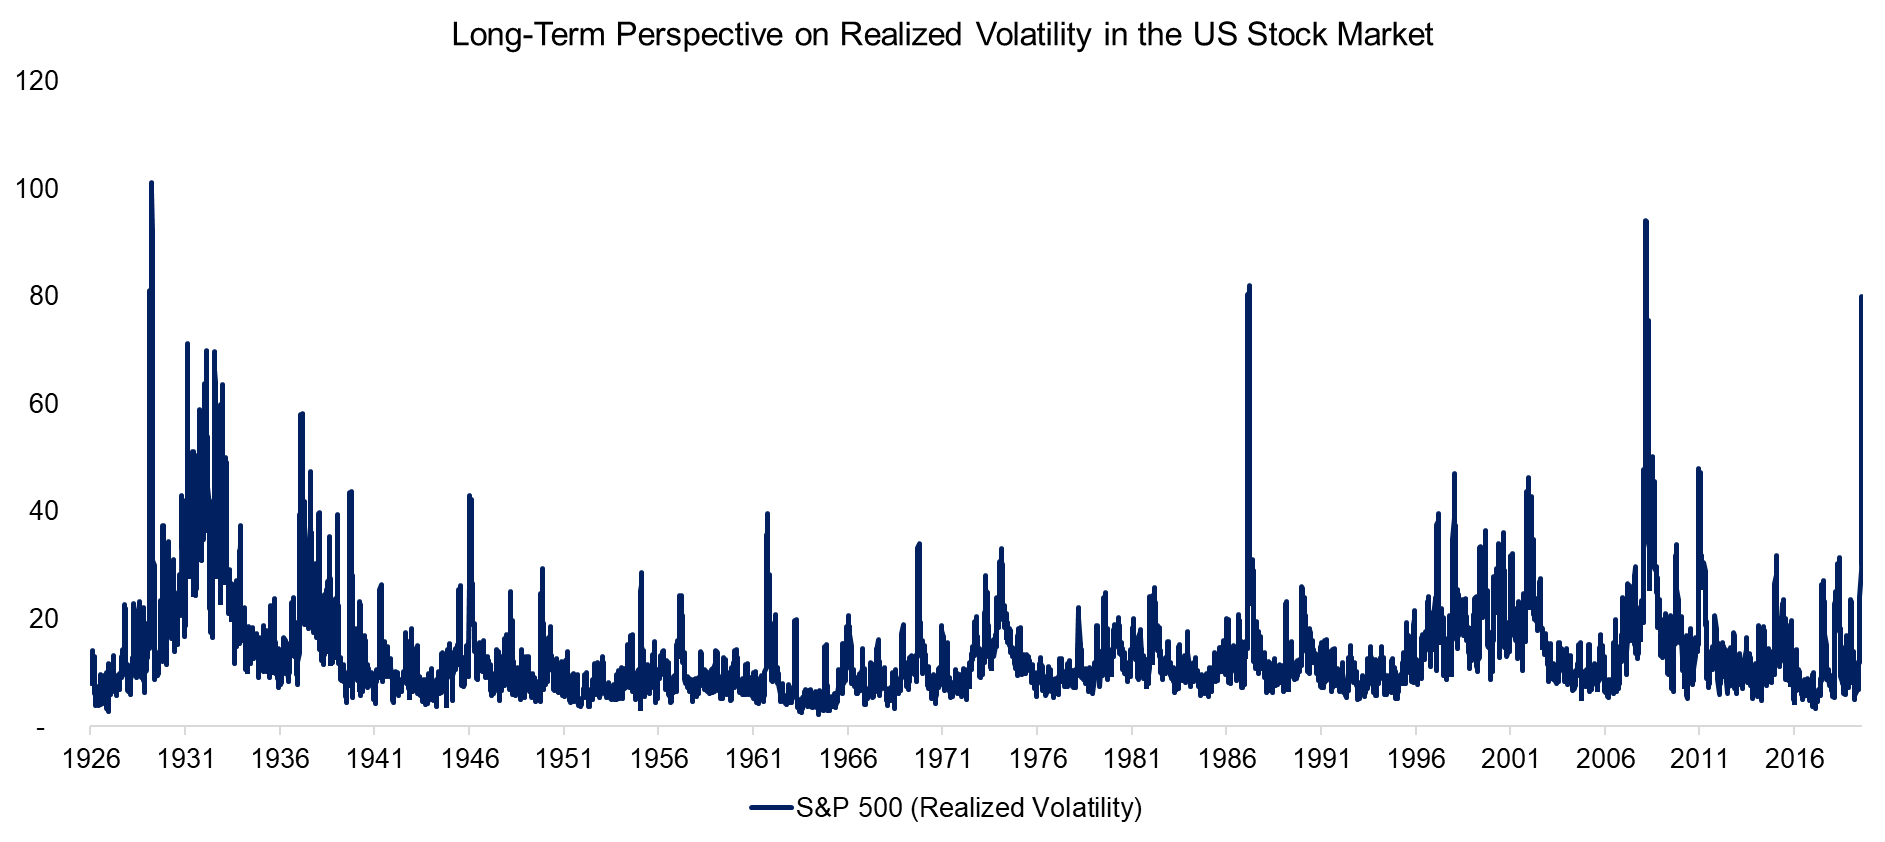 Long-Term Perspective on Realized Volatility in the US Stock Market